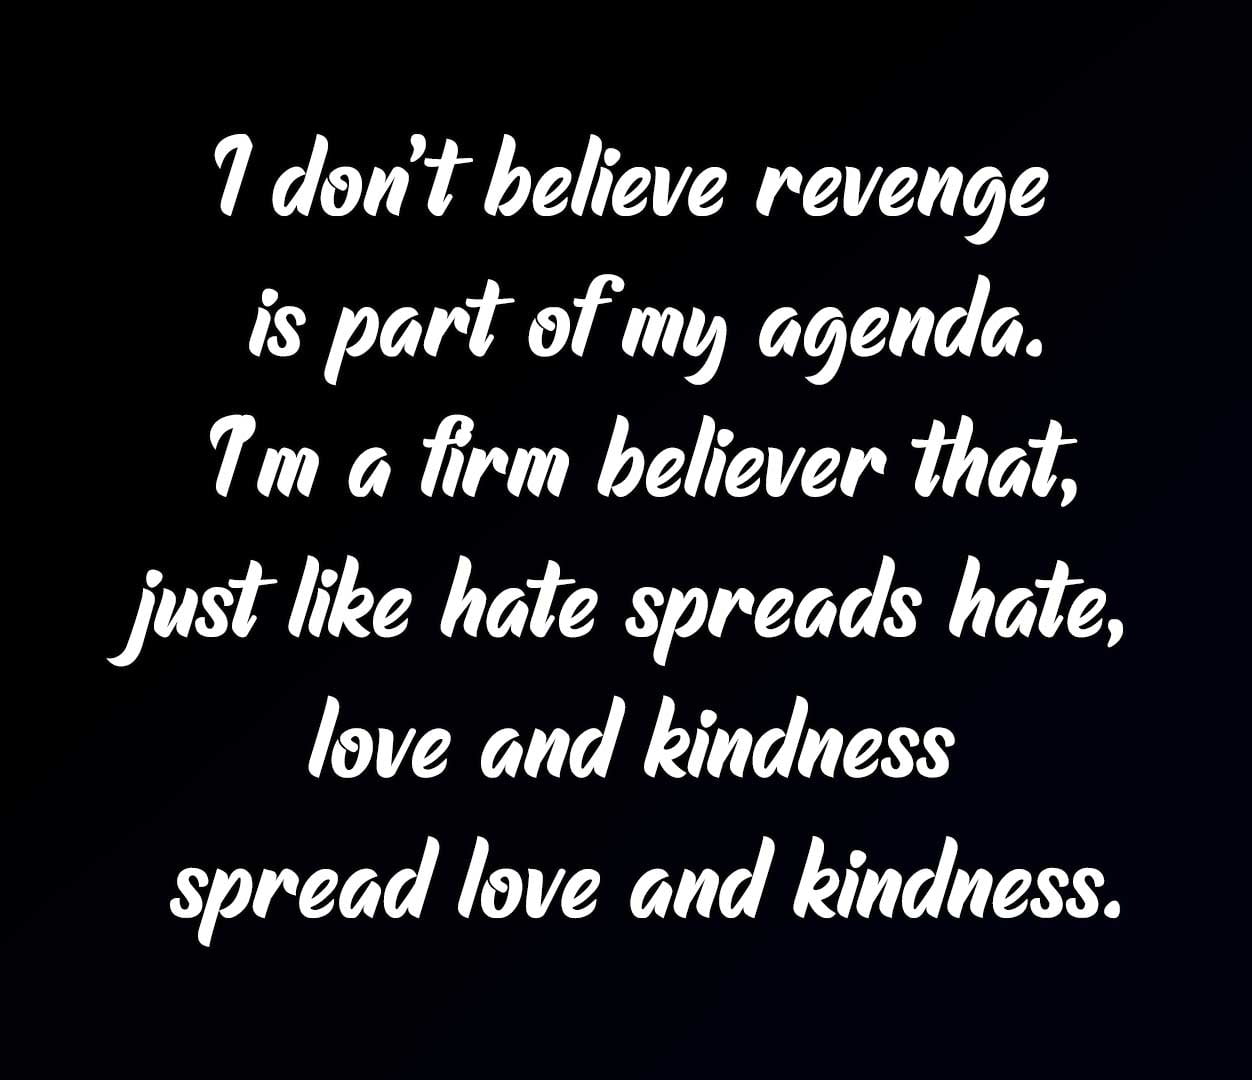 I don't believe revenge is part of my agenda. I'm a firm believer that, just like hate spreads hate, love and kindness spread love and kindness.